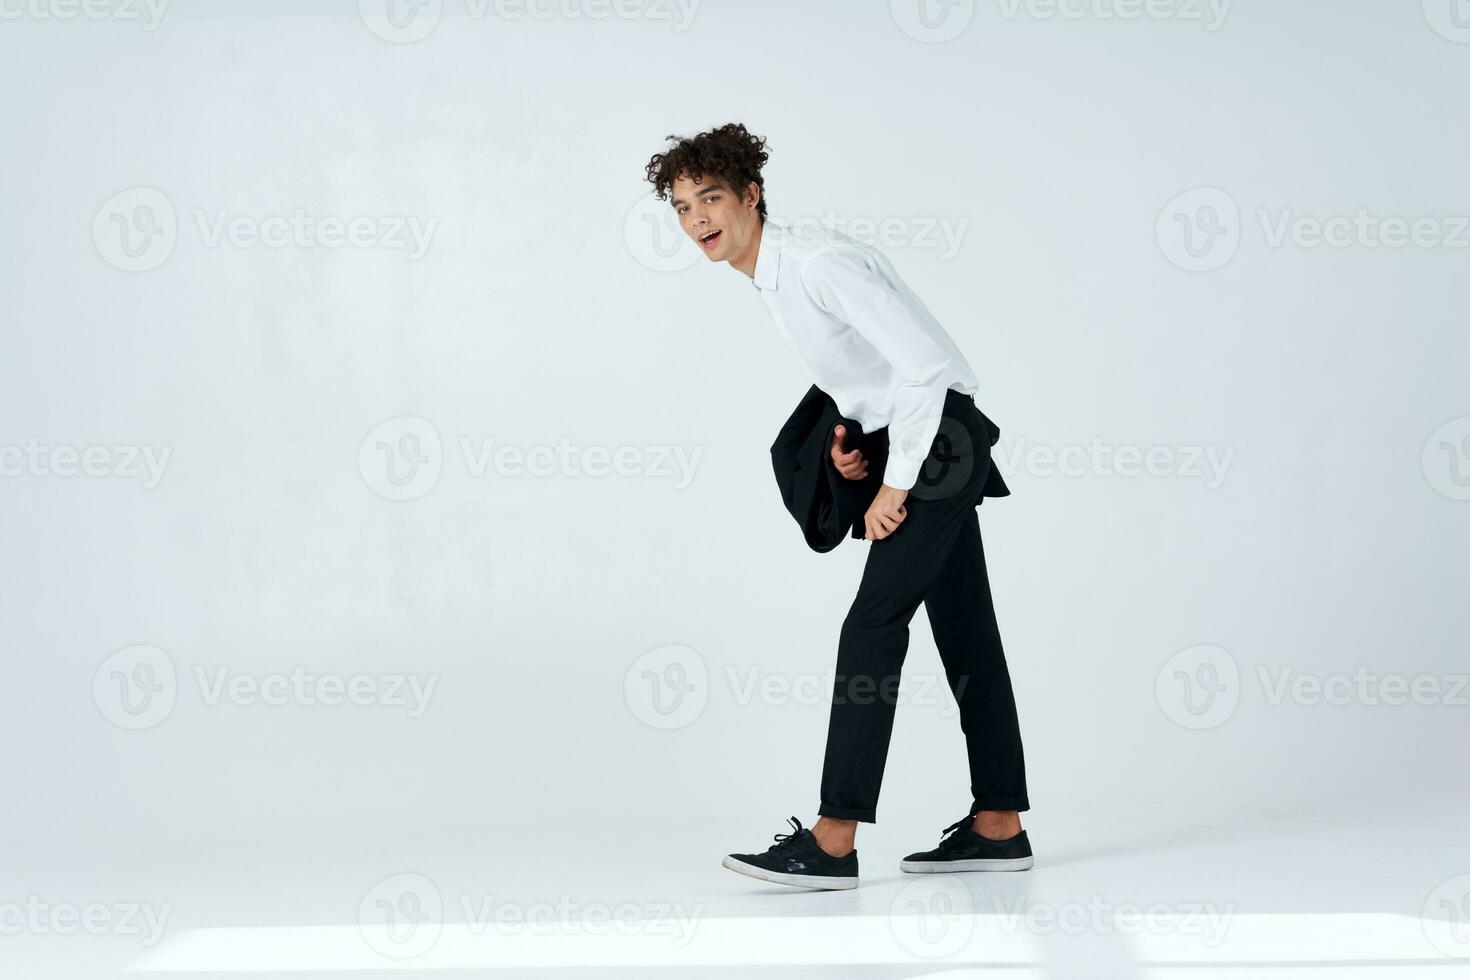 man in suit posing fashion self confidence business photo